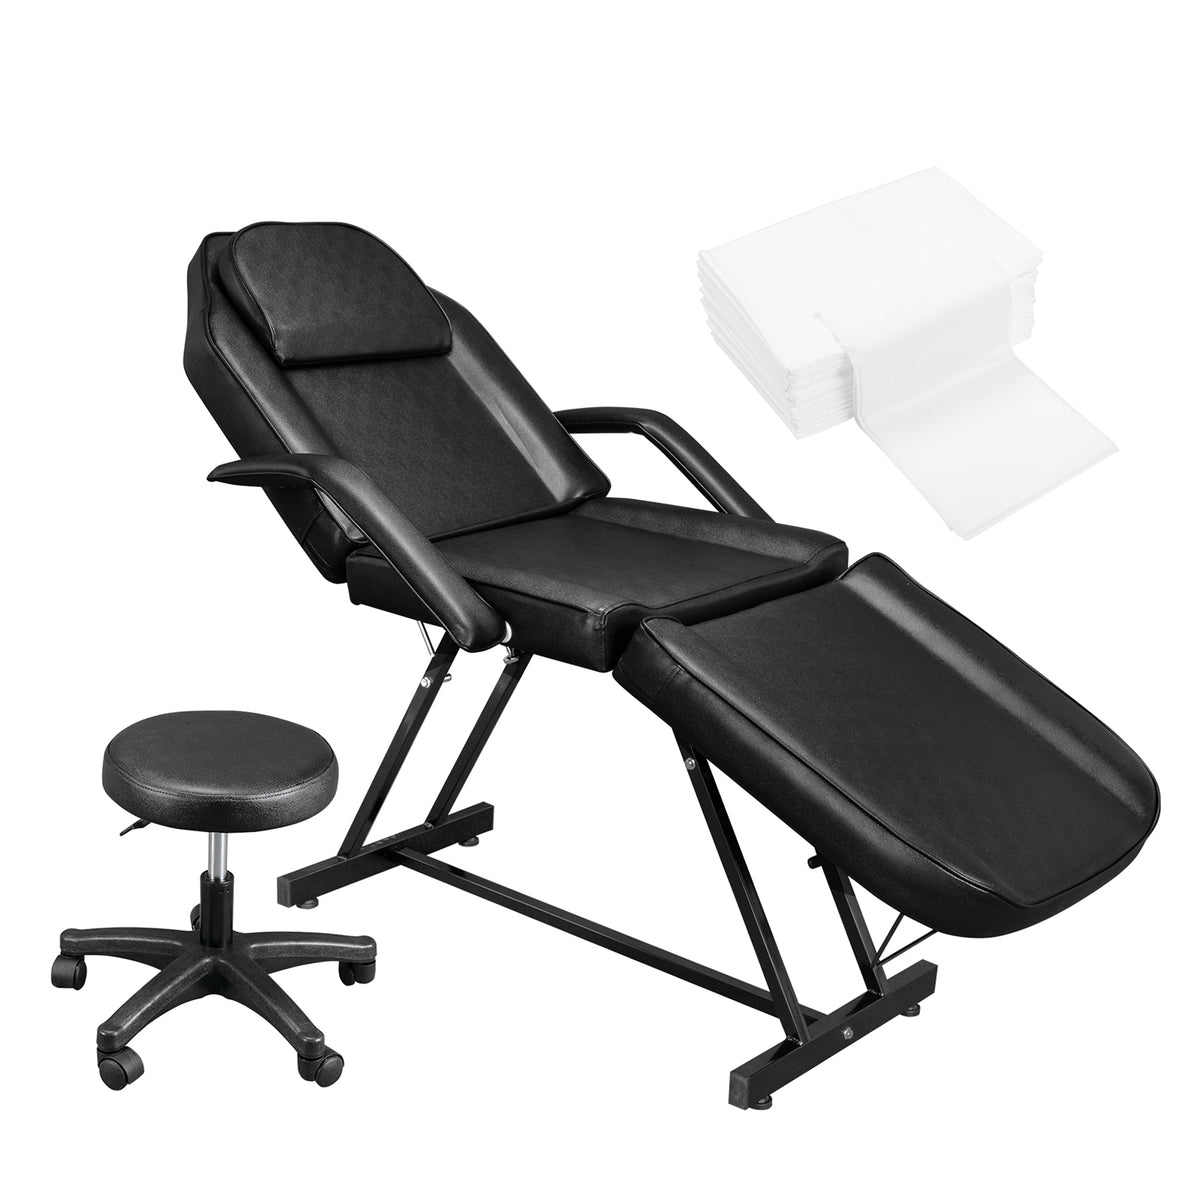 Massage Bed Tattoo Chair With Stool at Best Price in Jelapang  Courts  Malaysia Sdn Bhd